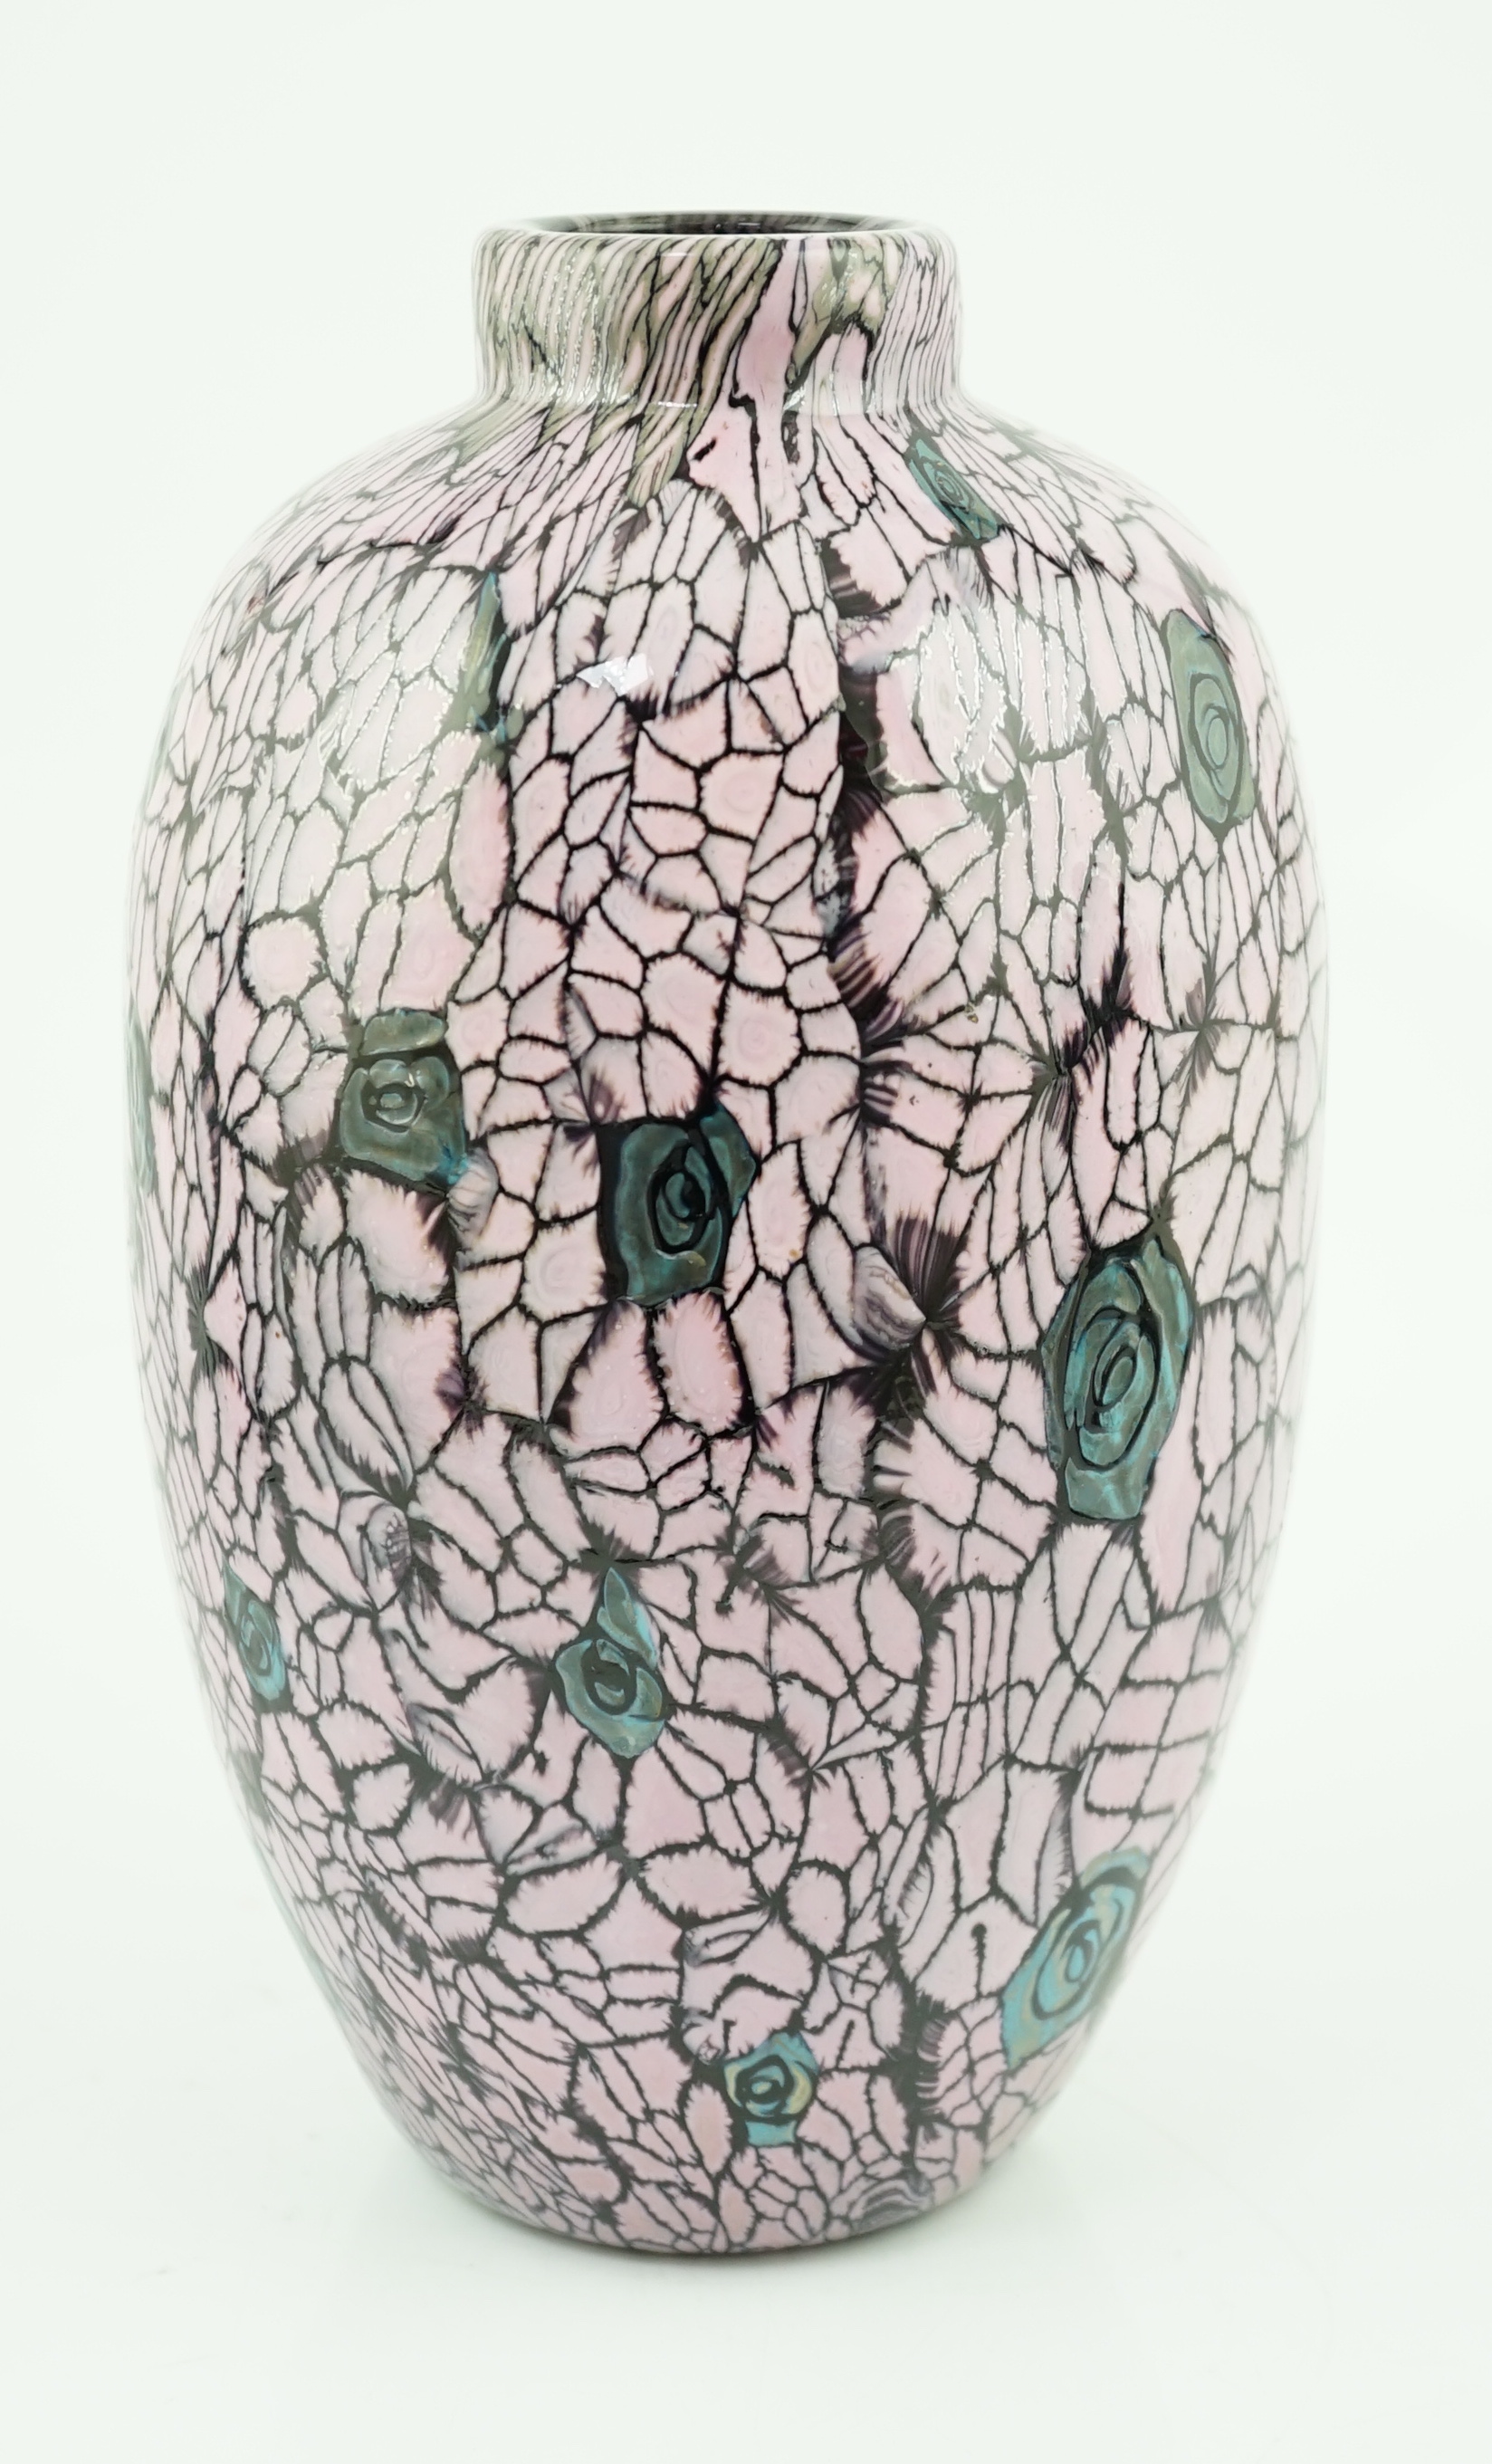 Vittorio Ferro (1932-2012) A Murano glass Murrine vase, decorated with grey roses on a pink ground, unsigned, 27cm, Please note this lot attracts an additional import tax of 20% on the hammer price